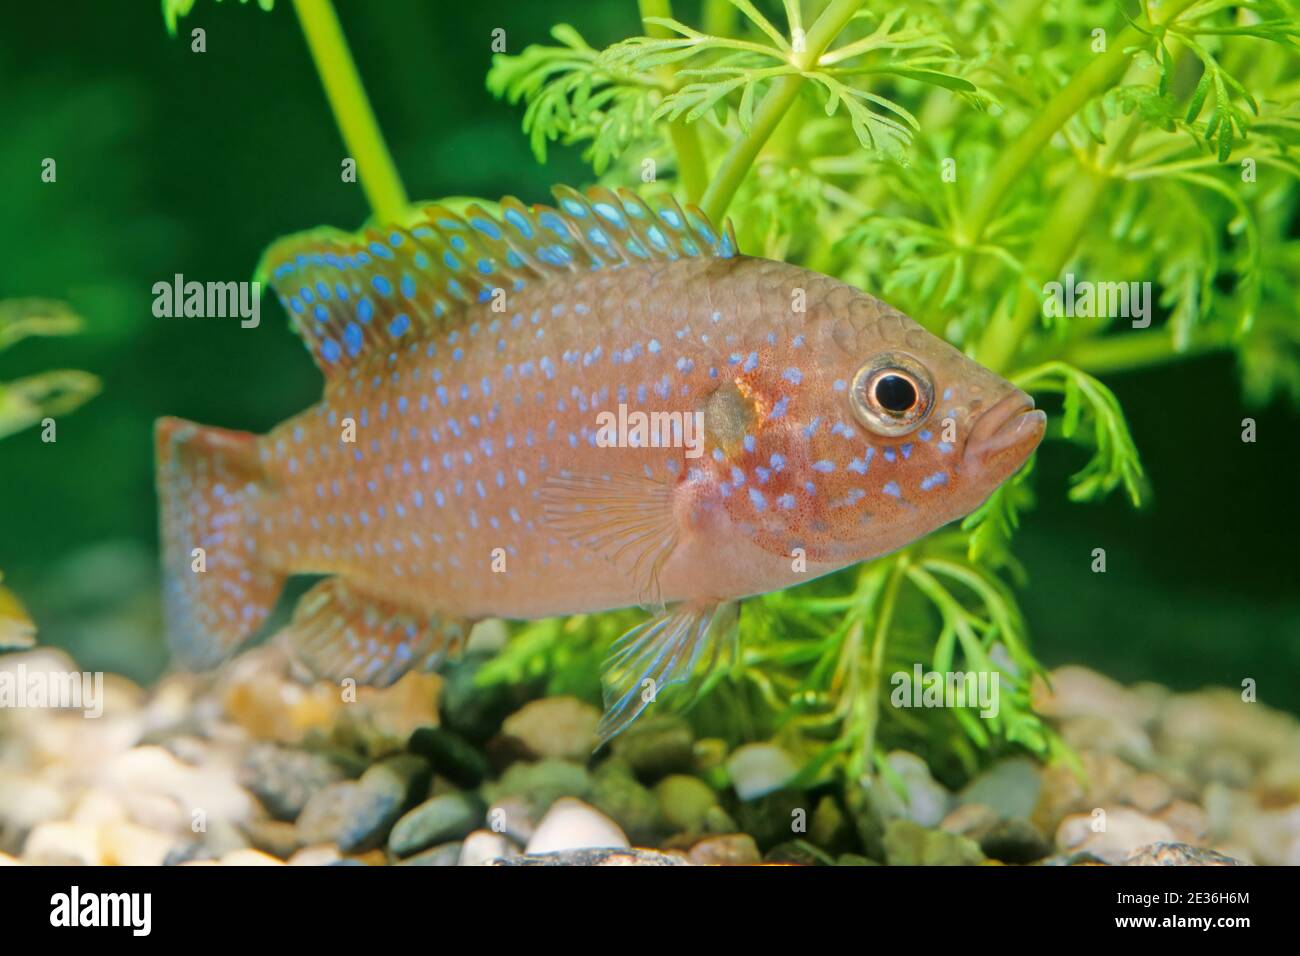 The African jewelfish (Hemichromis bimaculatus), also known as jewel cichlid or jewelfish, is from the family Cichlidae. Stock Photo